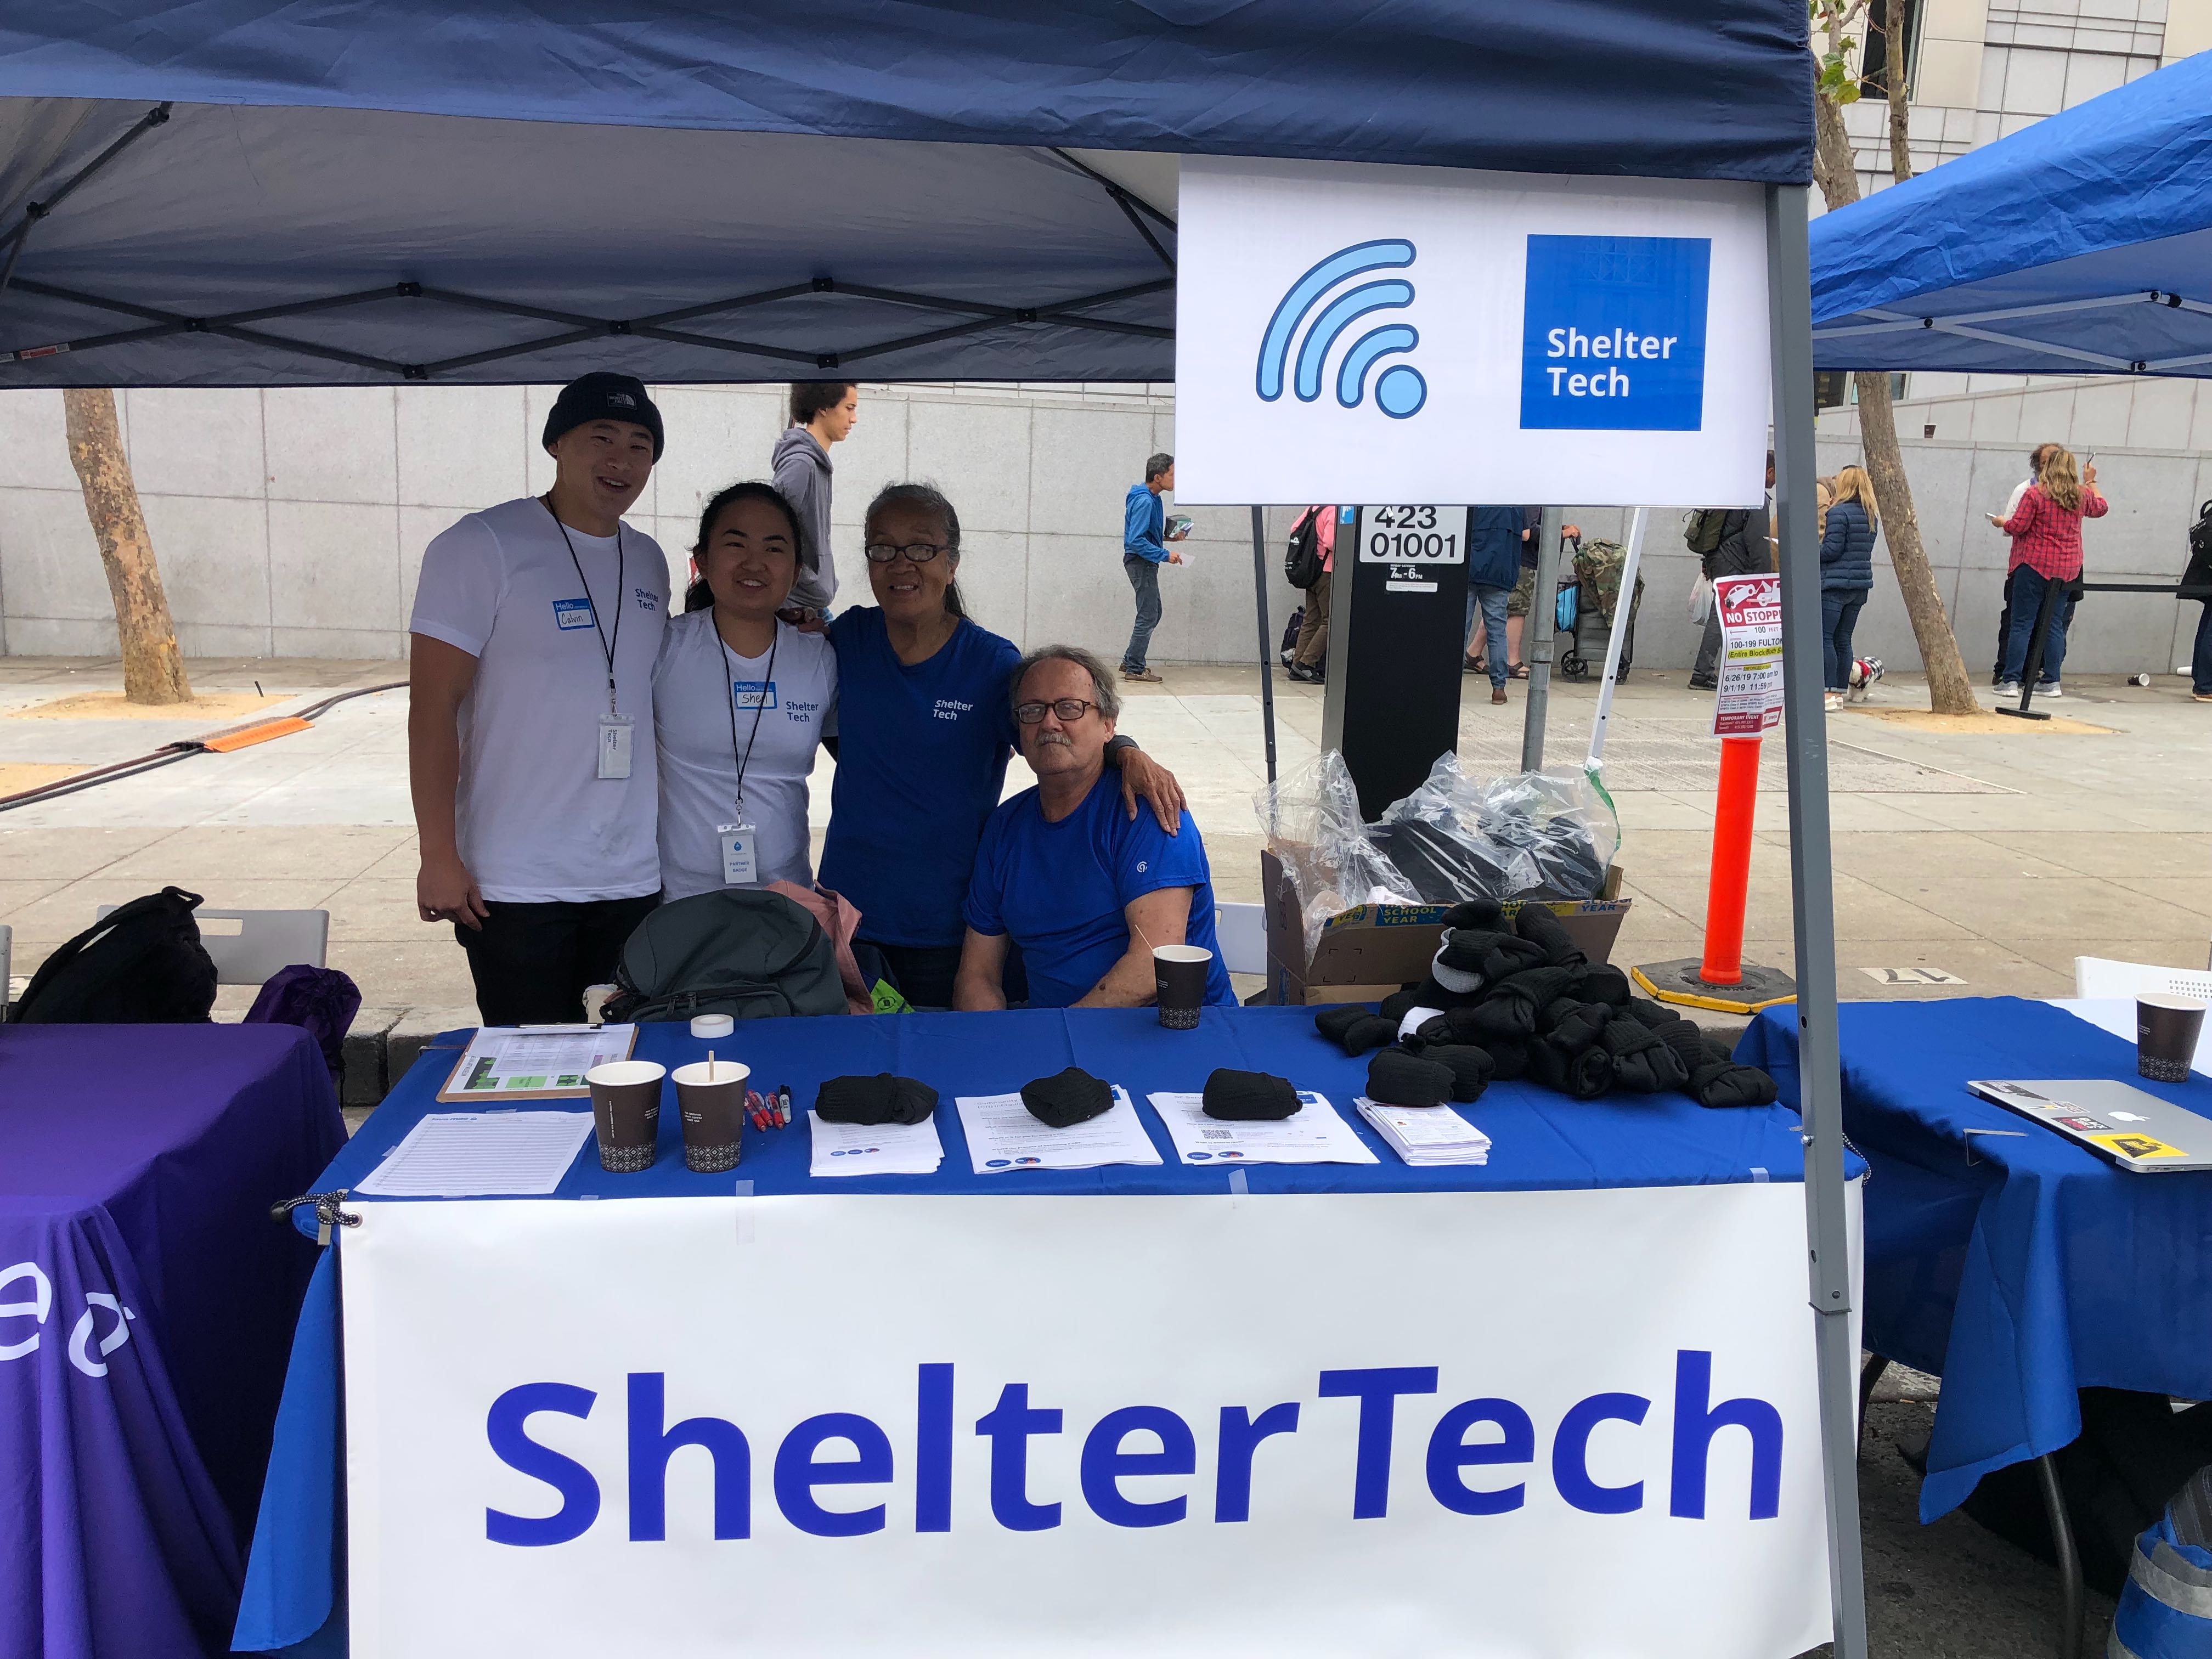 Image of ShelterTech booth with 4 volunteers smiling.